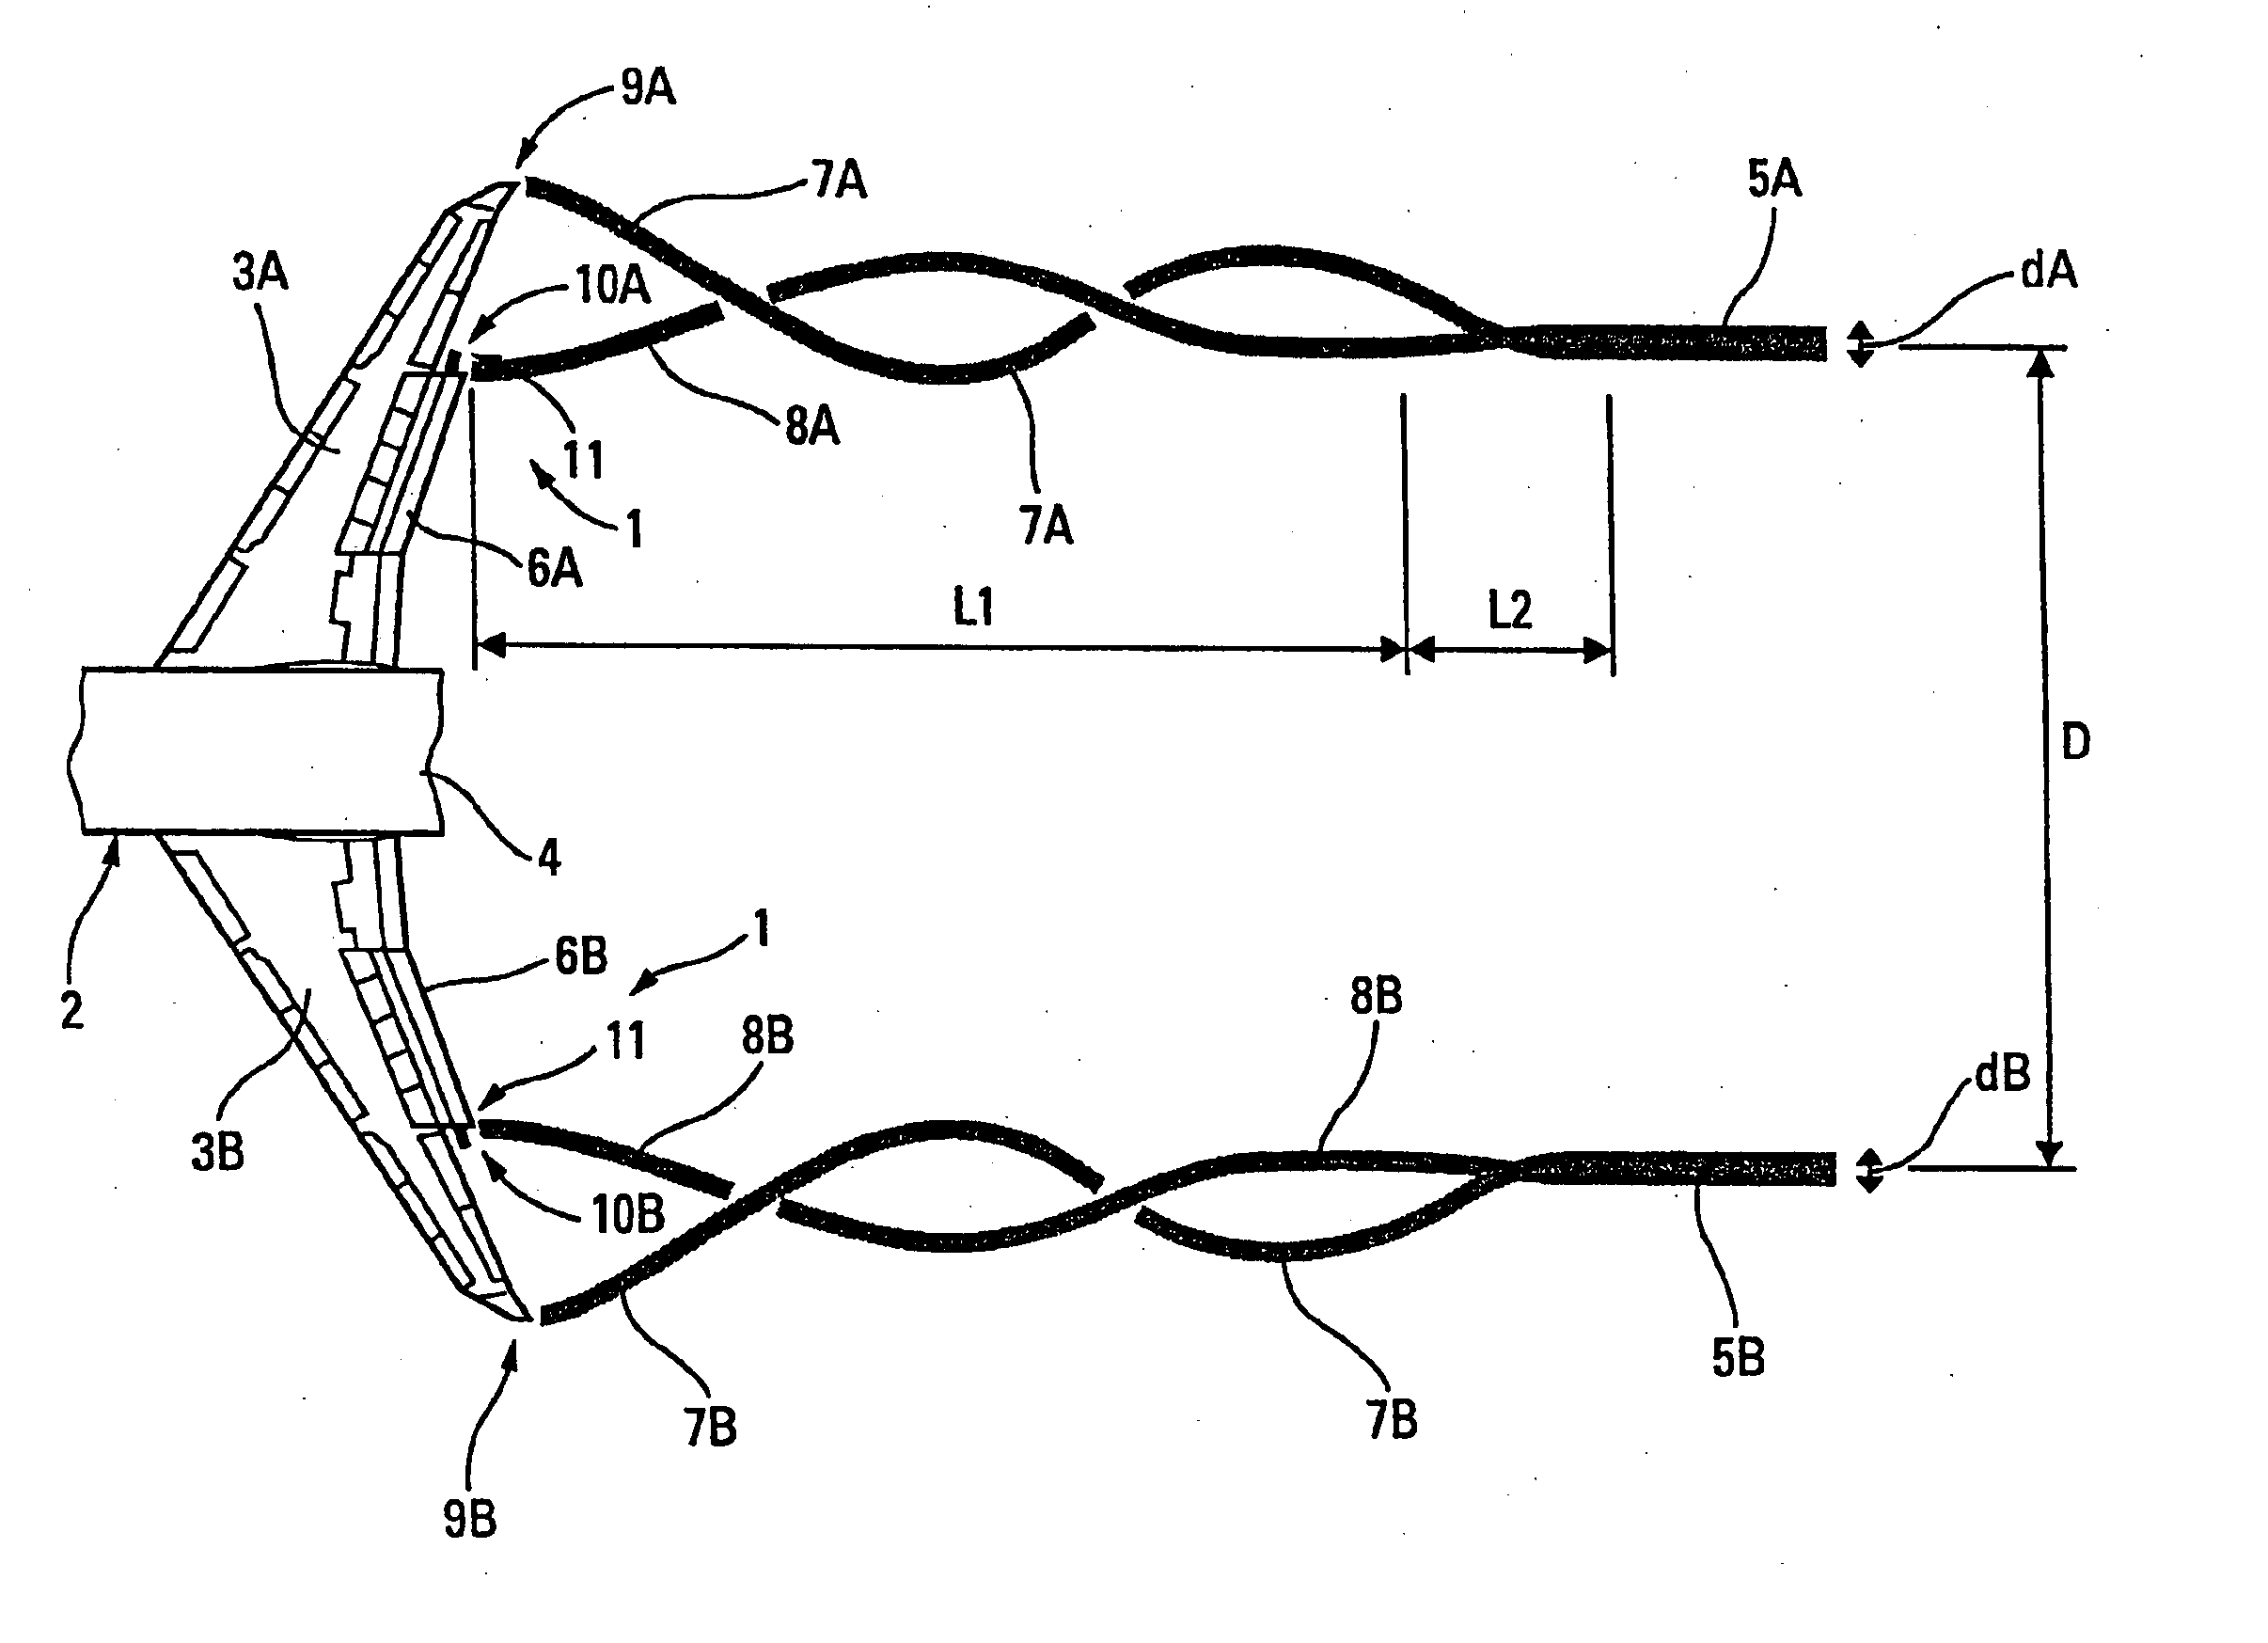 Apparatus for accelerating destruction of a vortex formed by a wing of an aircraft